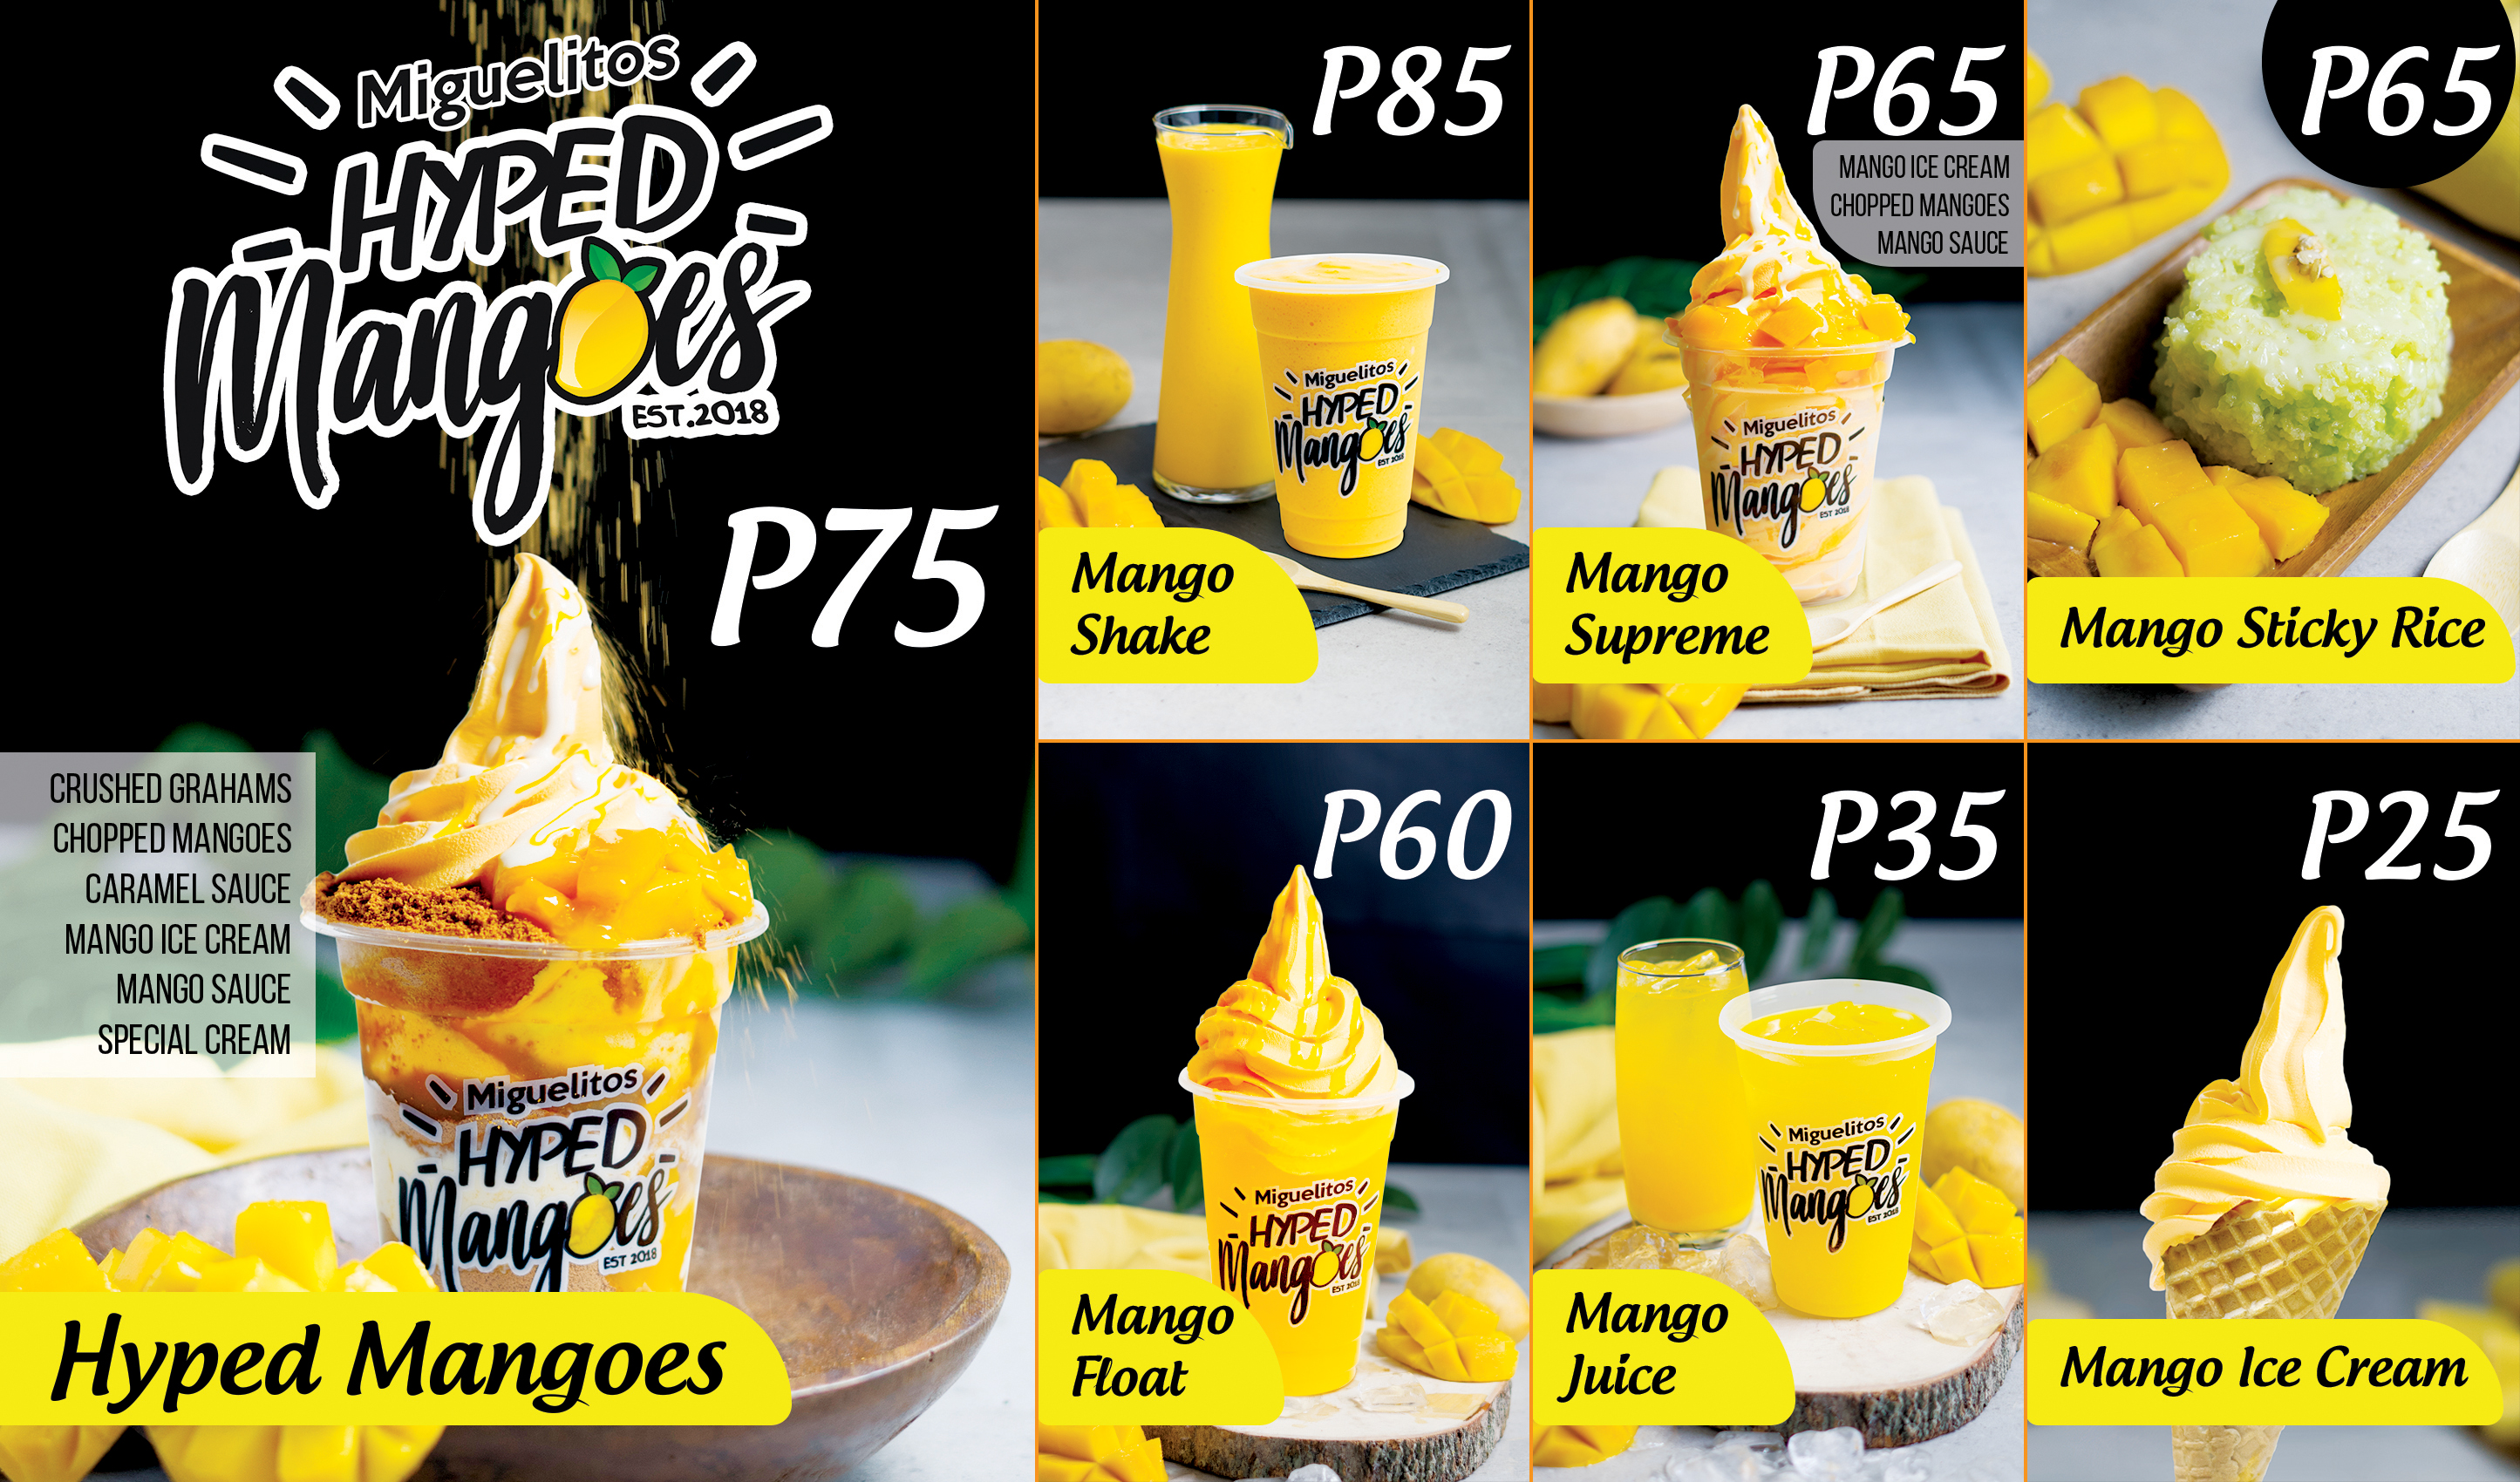 Miguelitos Hyped Mangoes Price List